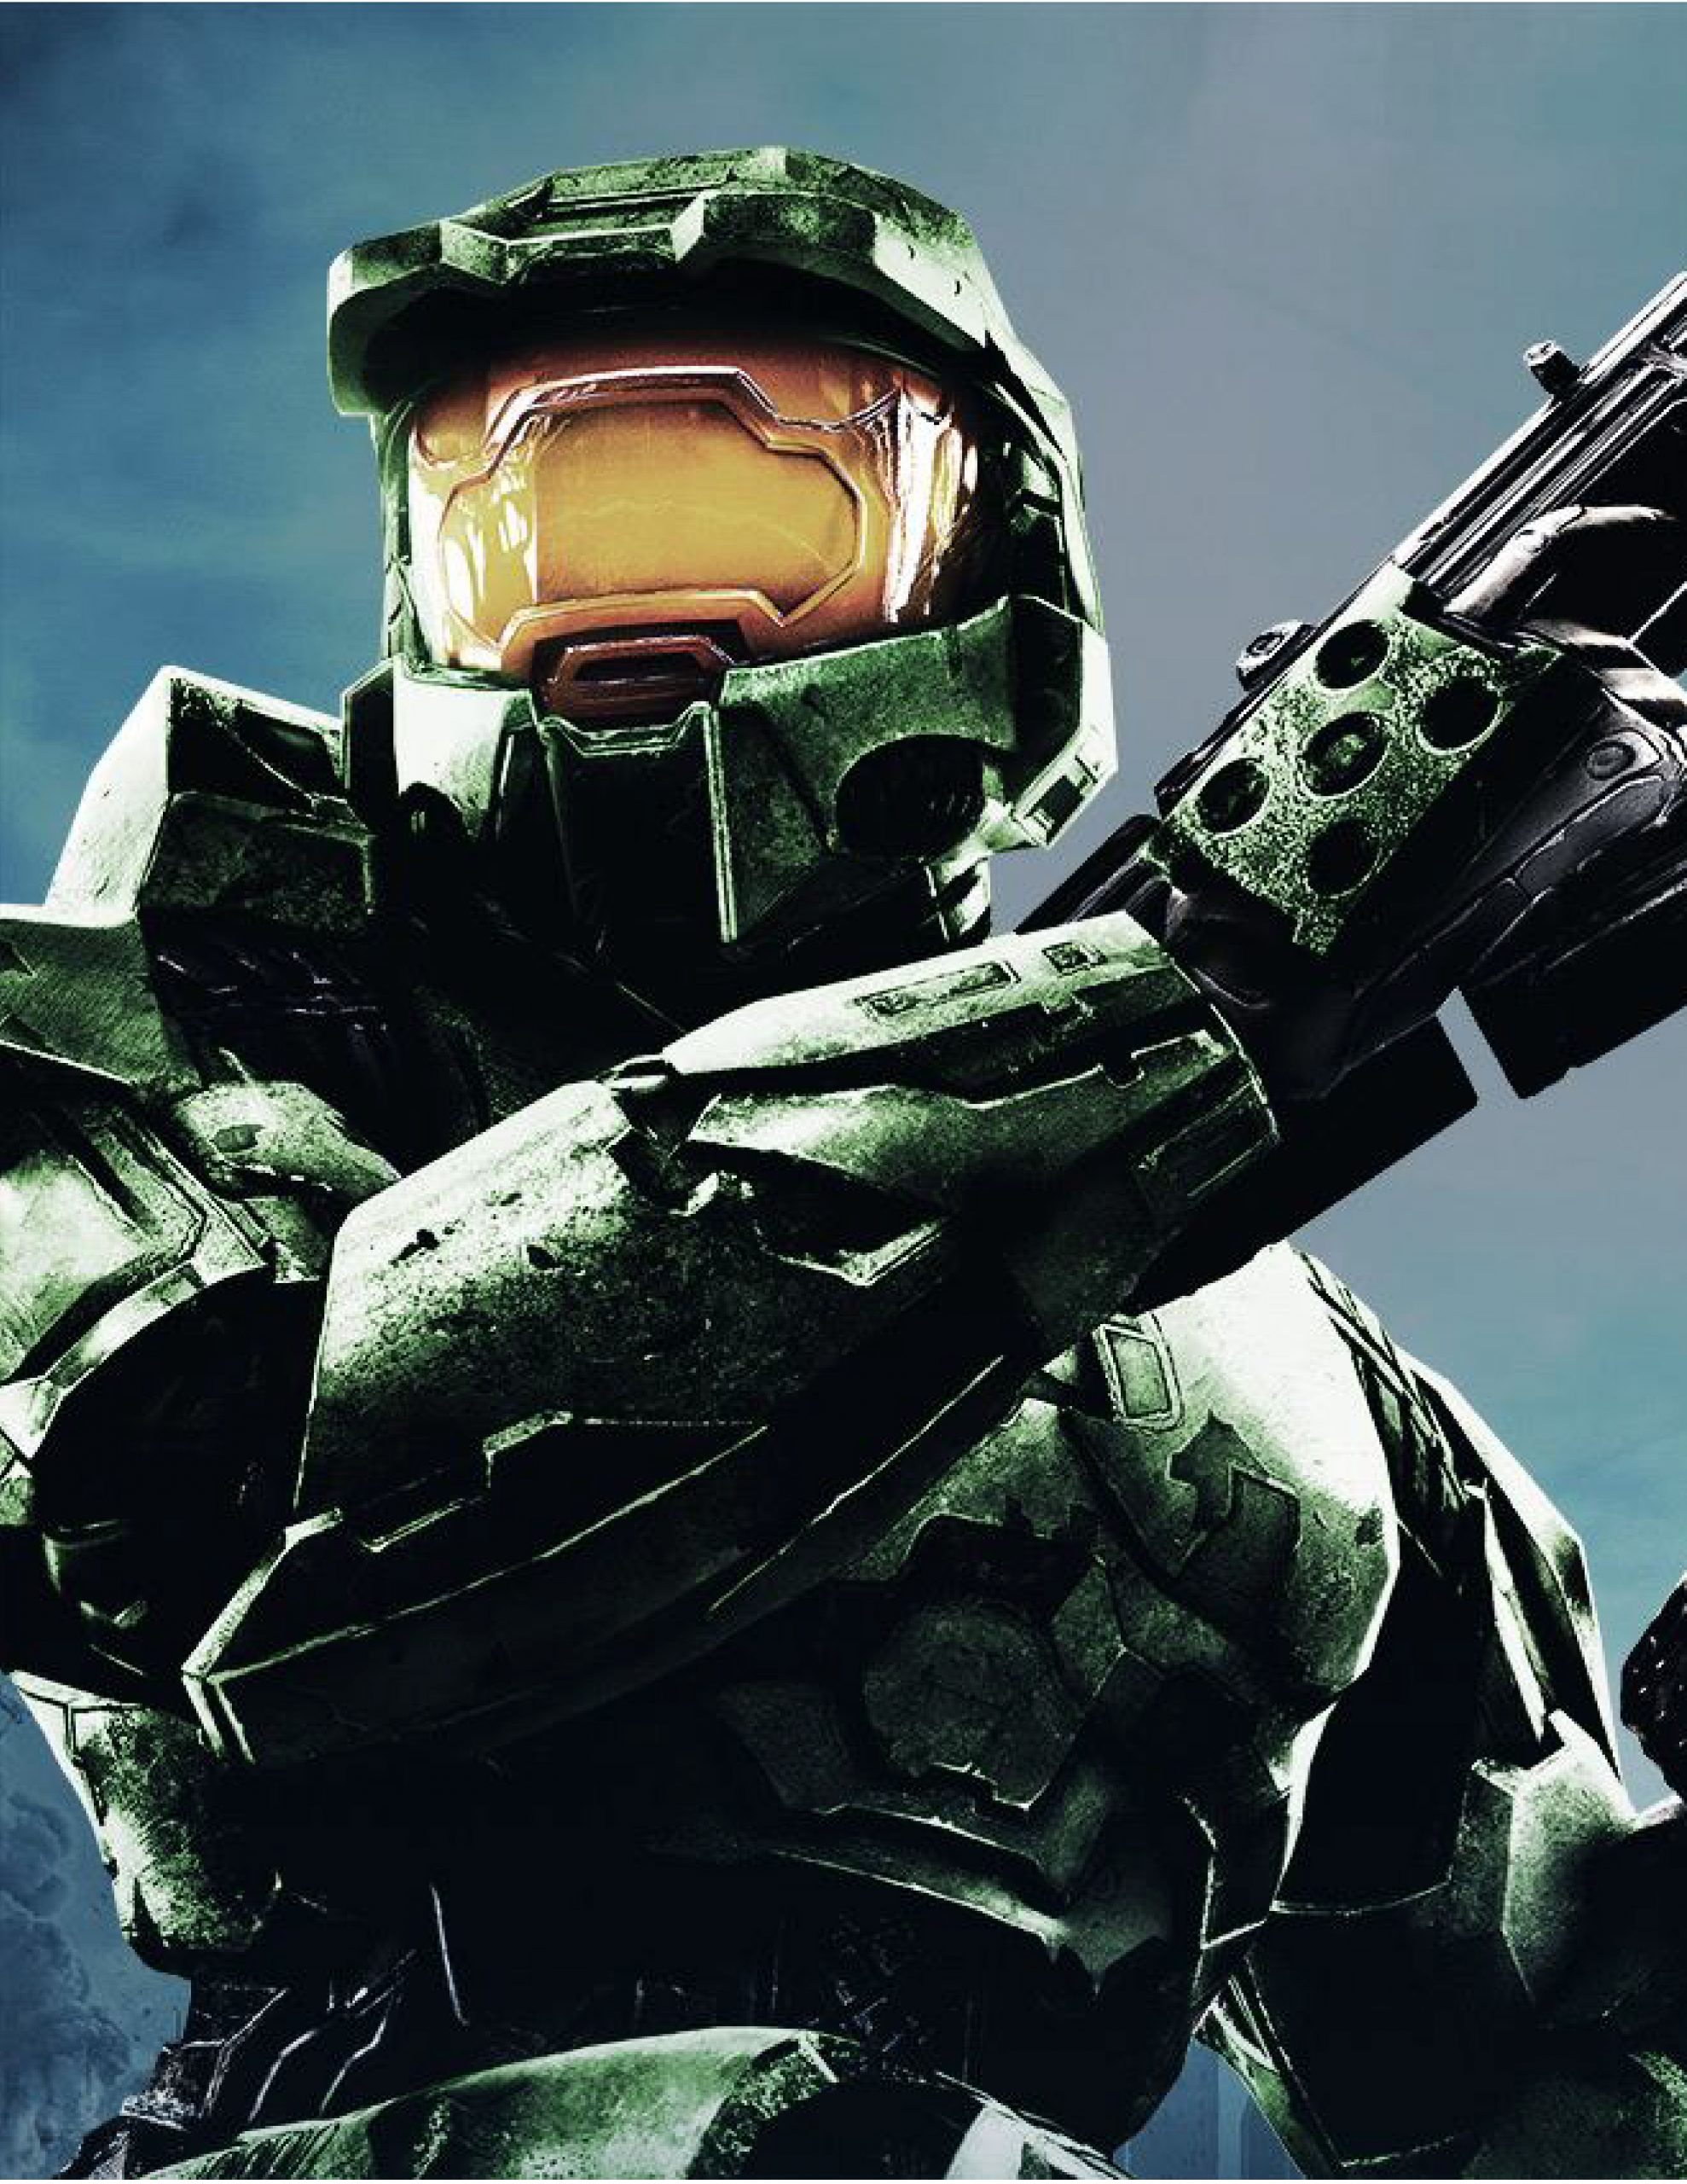 Halo 2: Masterpiece Across Editions (Review)